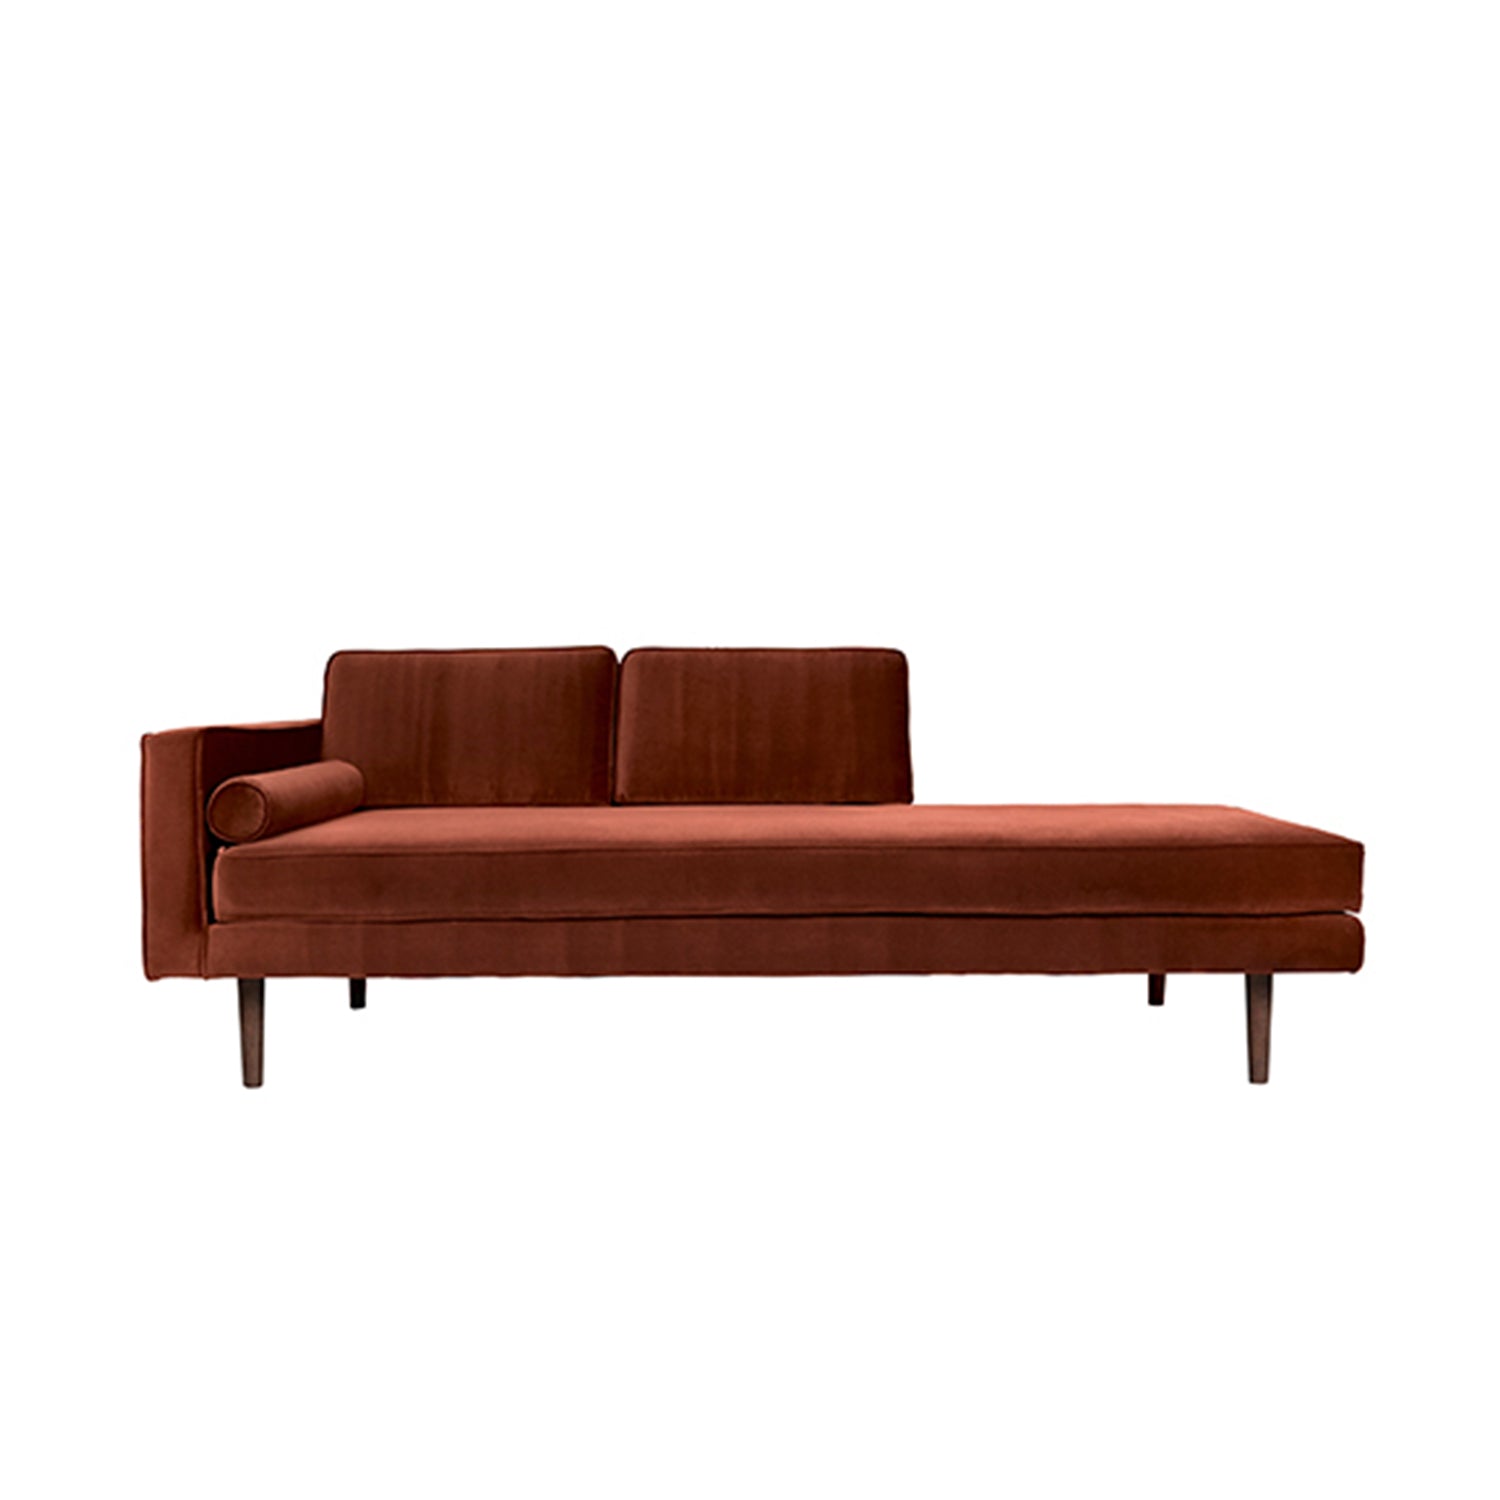 Wind Chaise Longue - The Design Choice